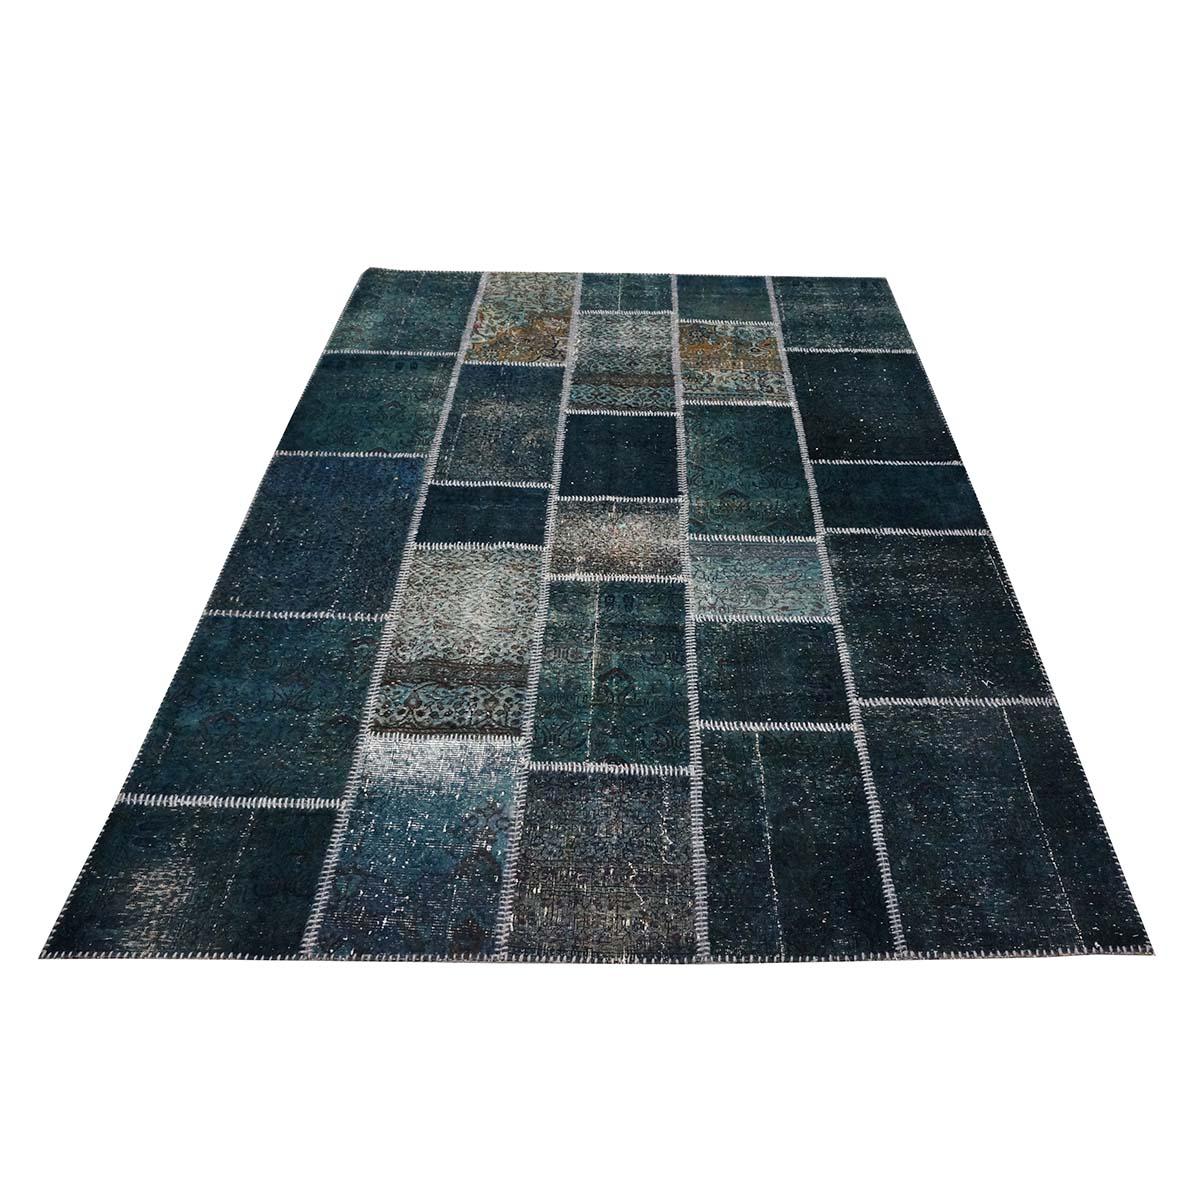  Ashly Fine Rugs presents a Vintage Turkish Patchwork 6x8 area rug. This rug a is combination of multiple handmade vintage Turkish rugs that have been masterfully cut and sewn together to create a new and modern look. The beautiful rug consists of a